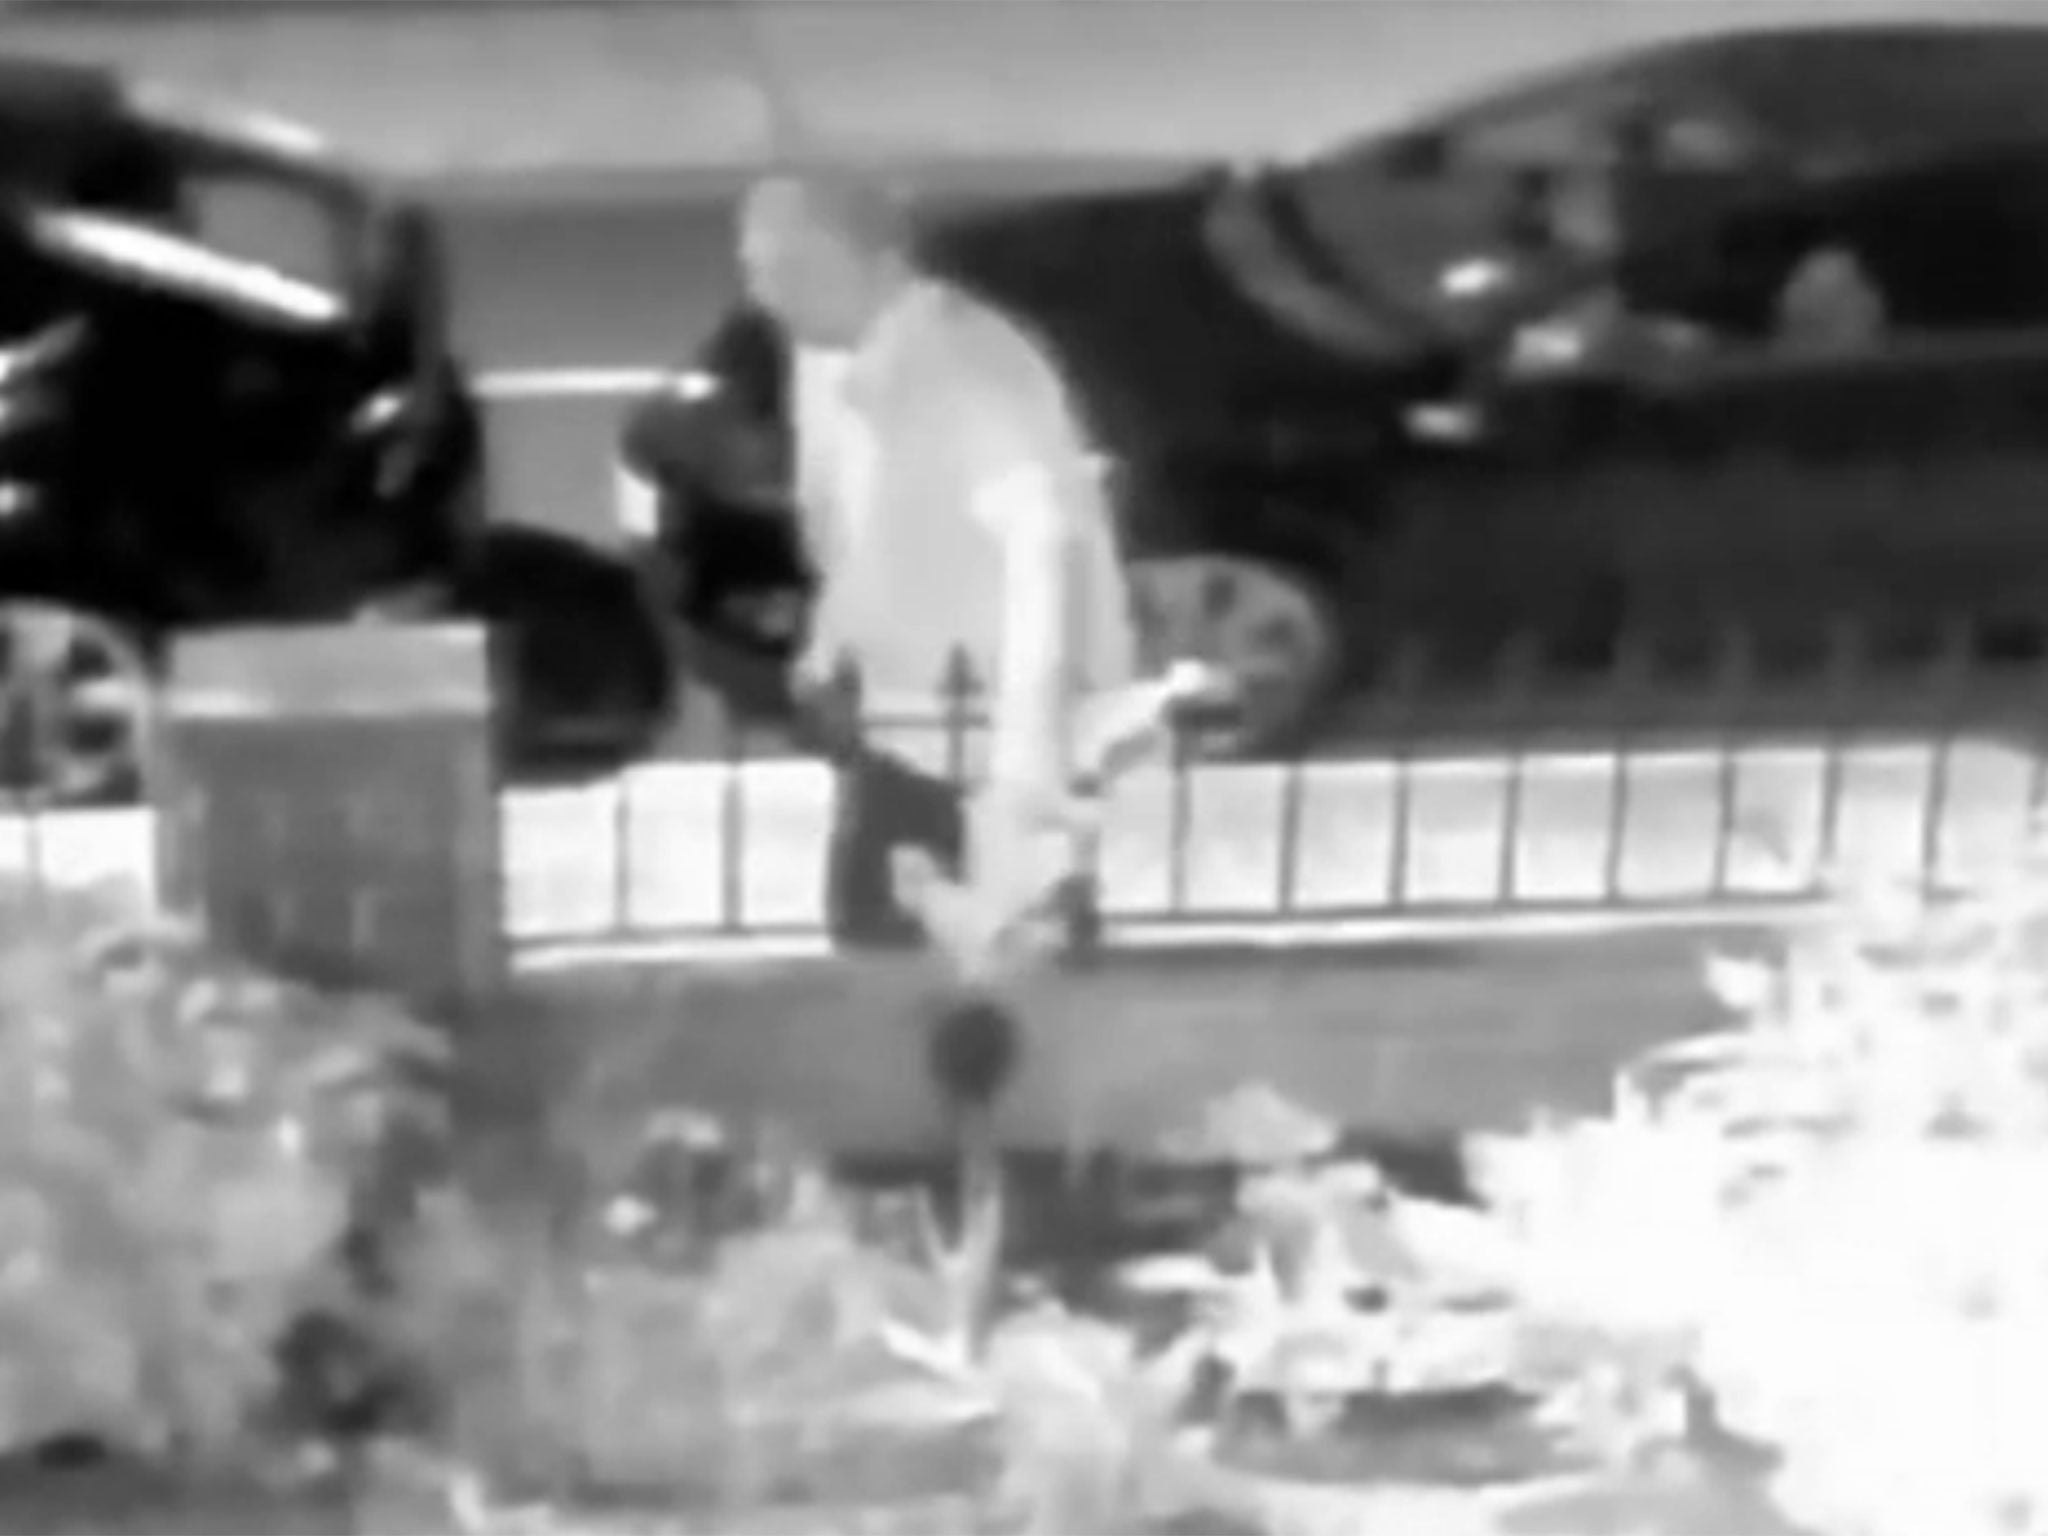 A still from CCTV footage showing a man yank plants from a garden at 2am